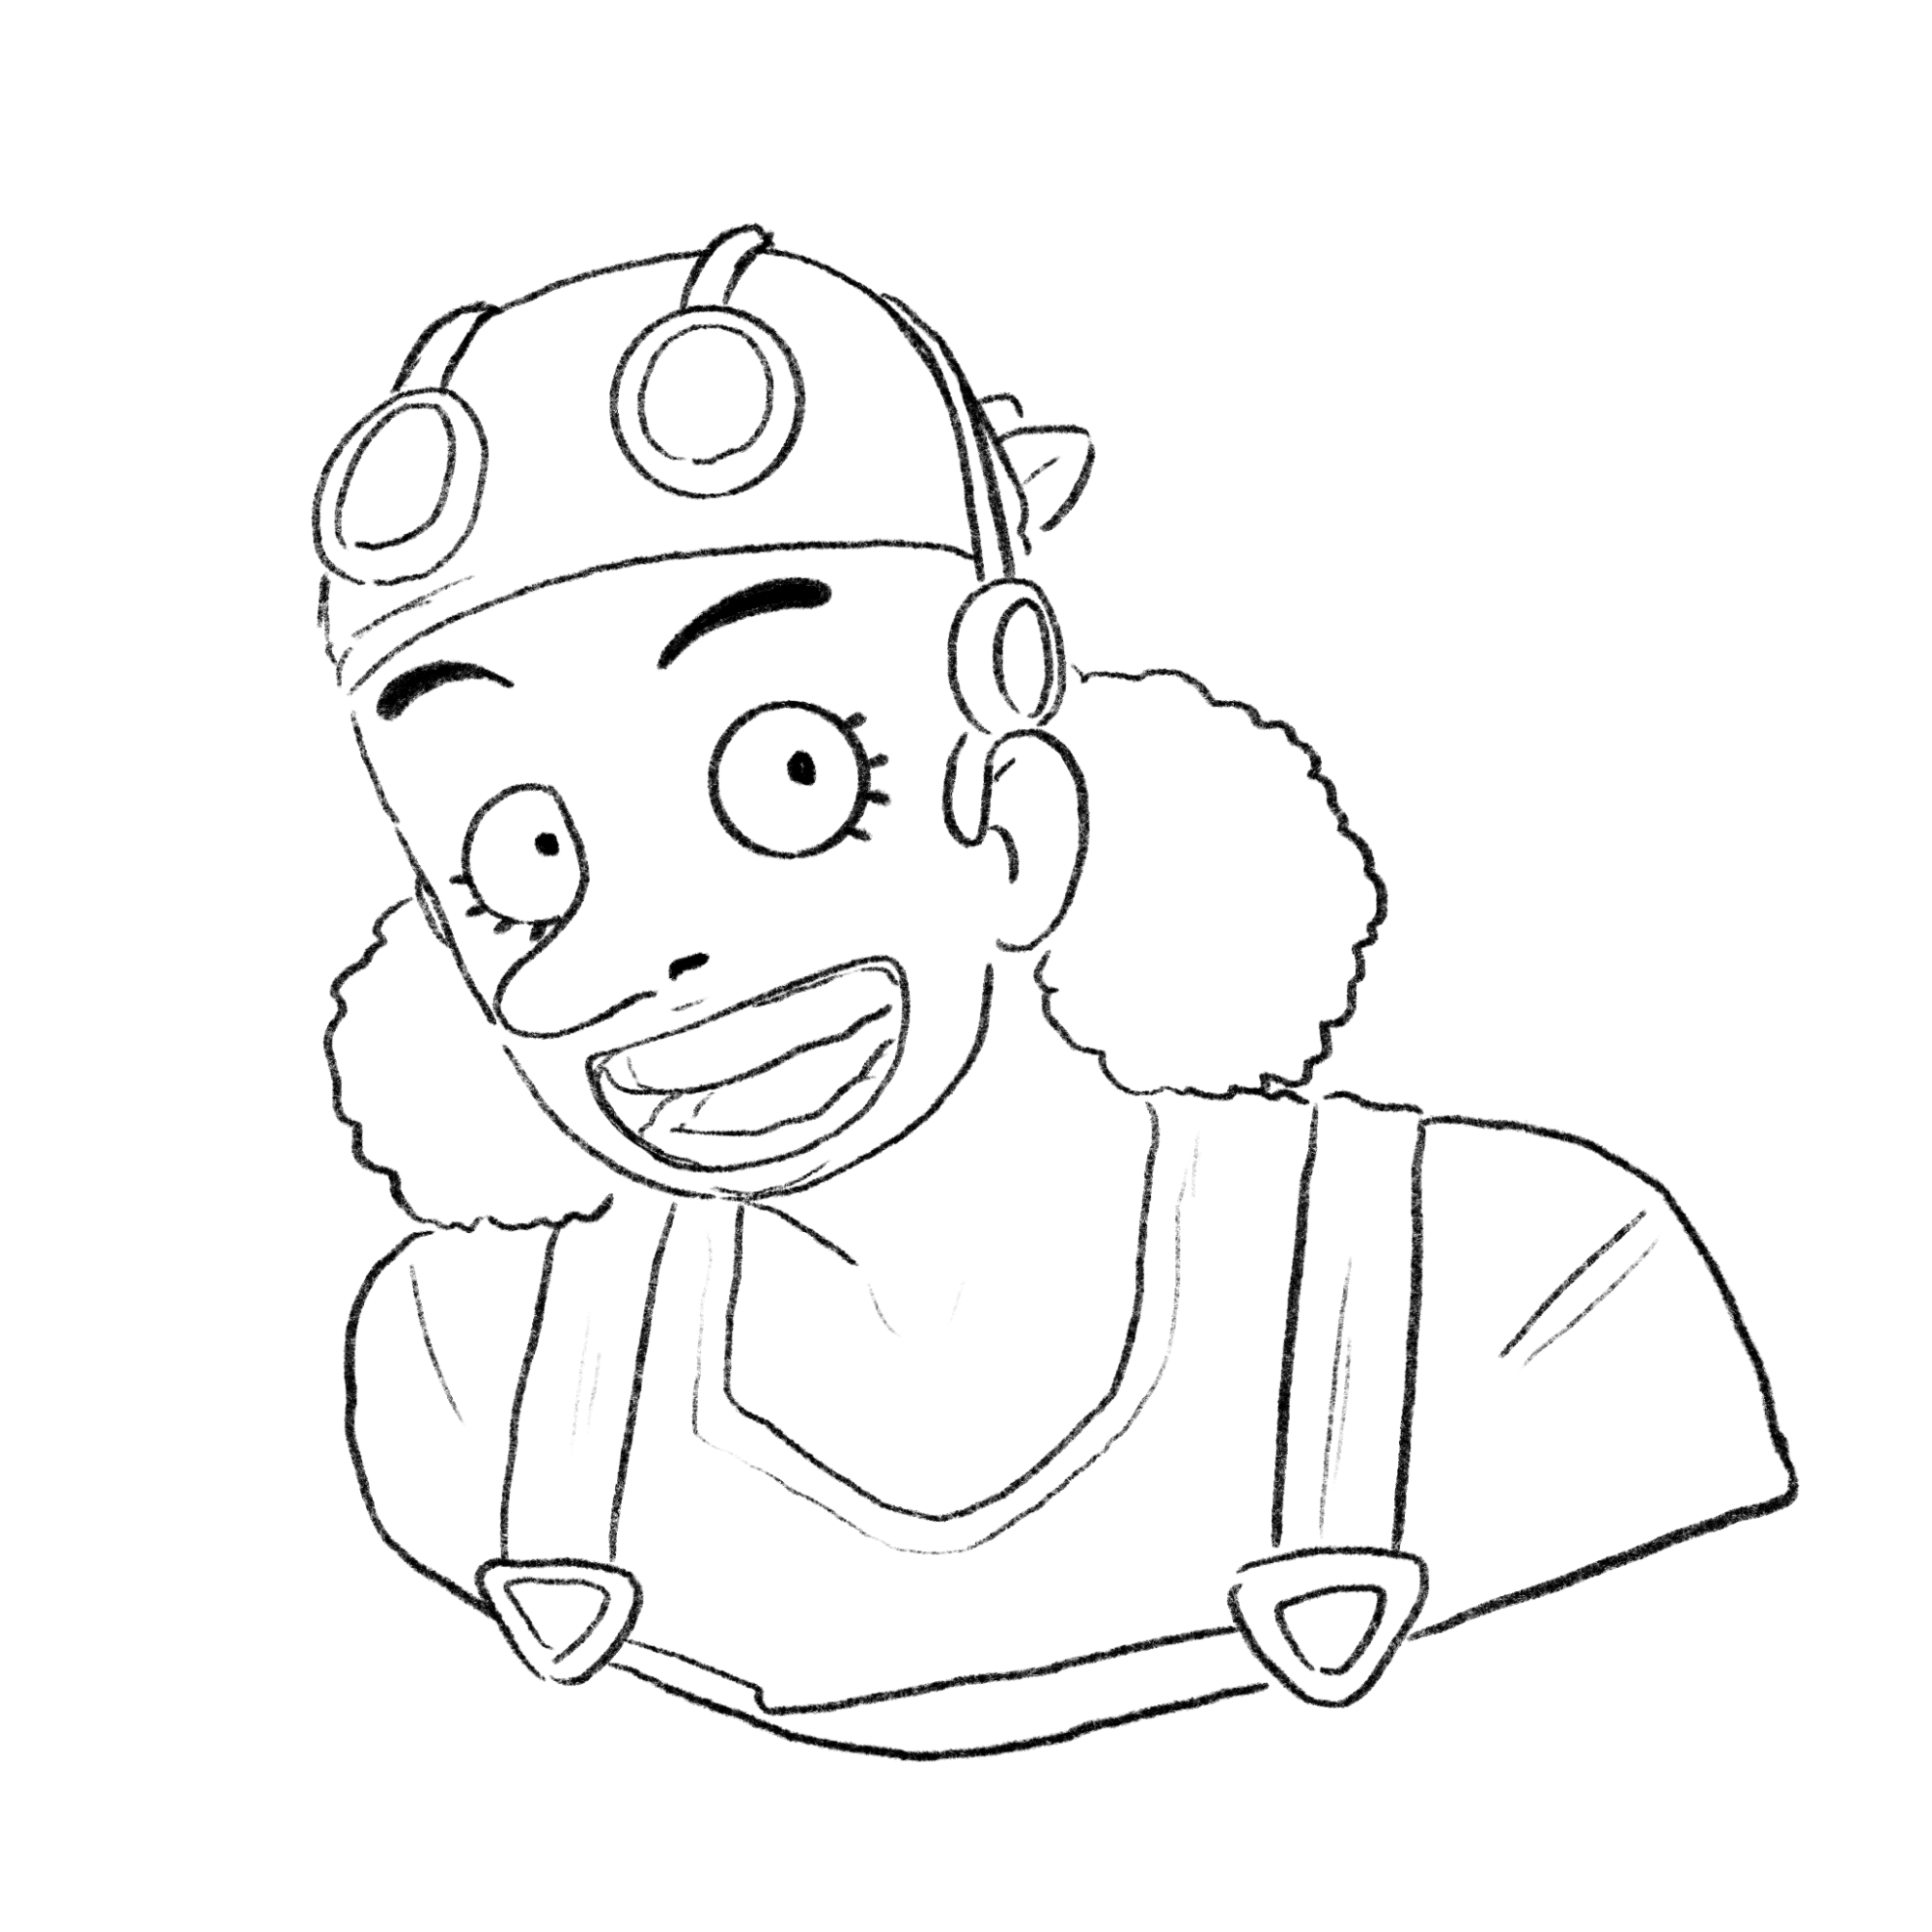 Usopp has curly black hair and a long nose. His long nose is an allusion to Pinocchio, who is also known for lying. 